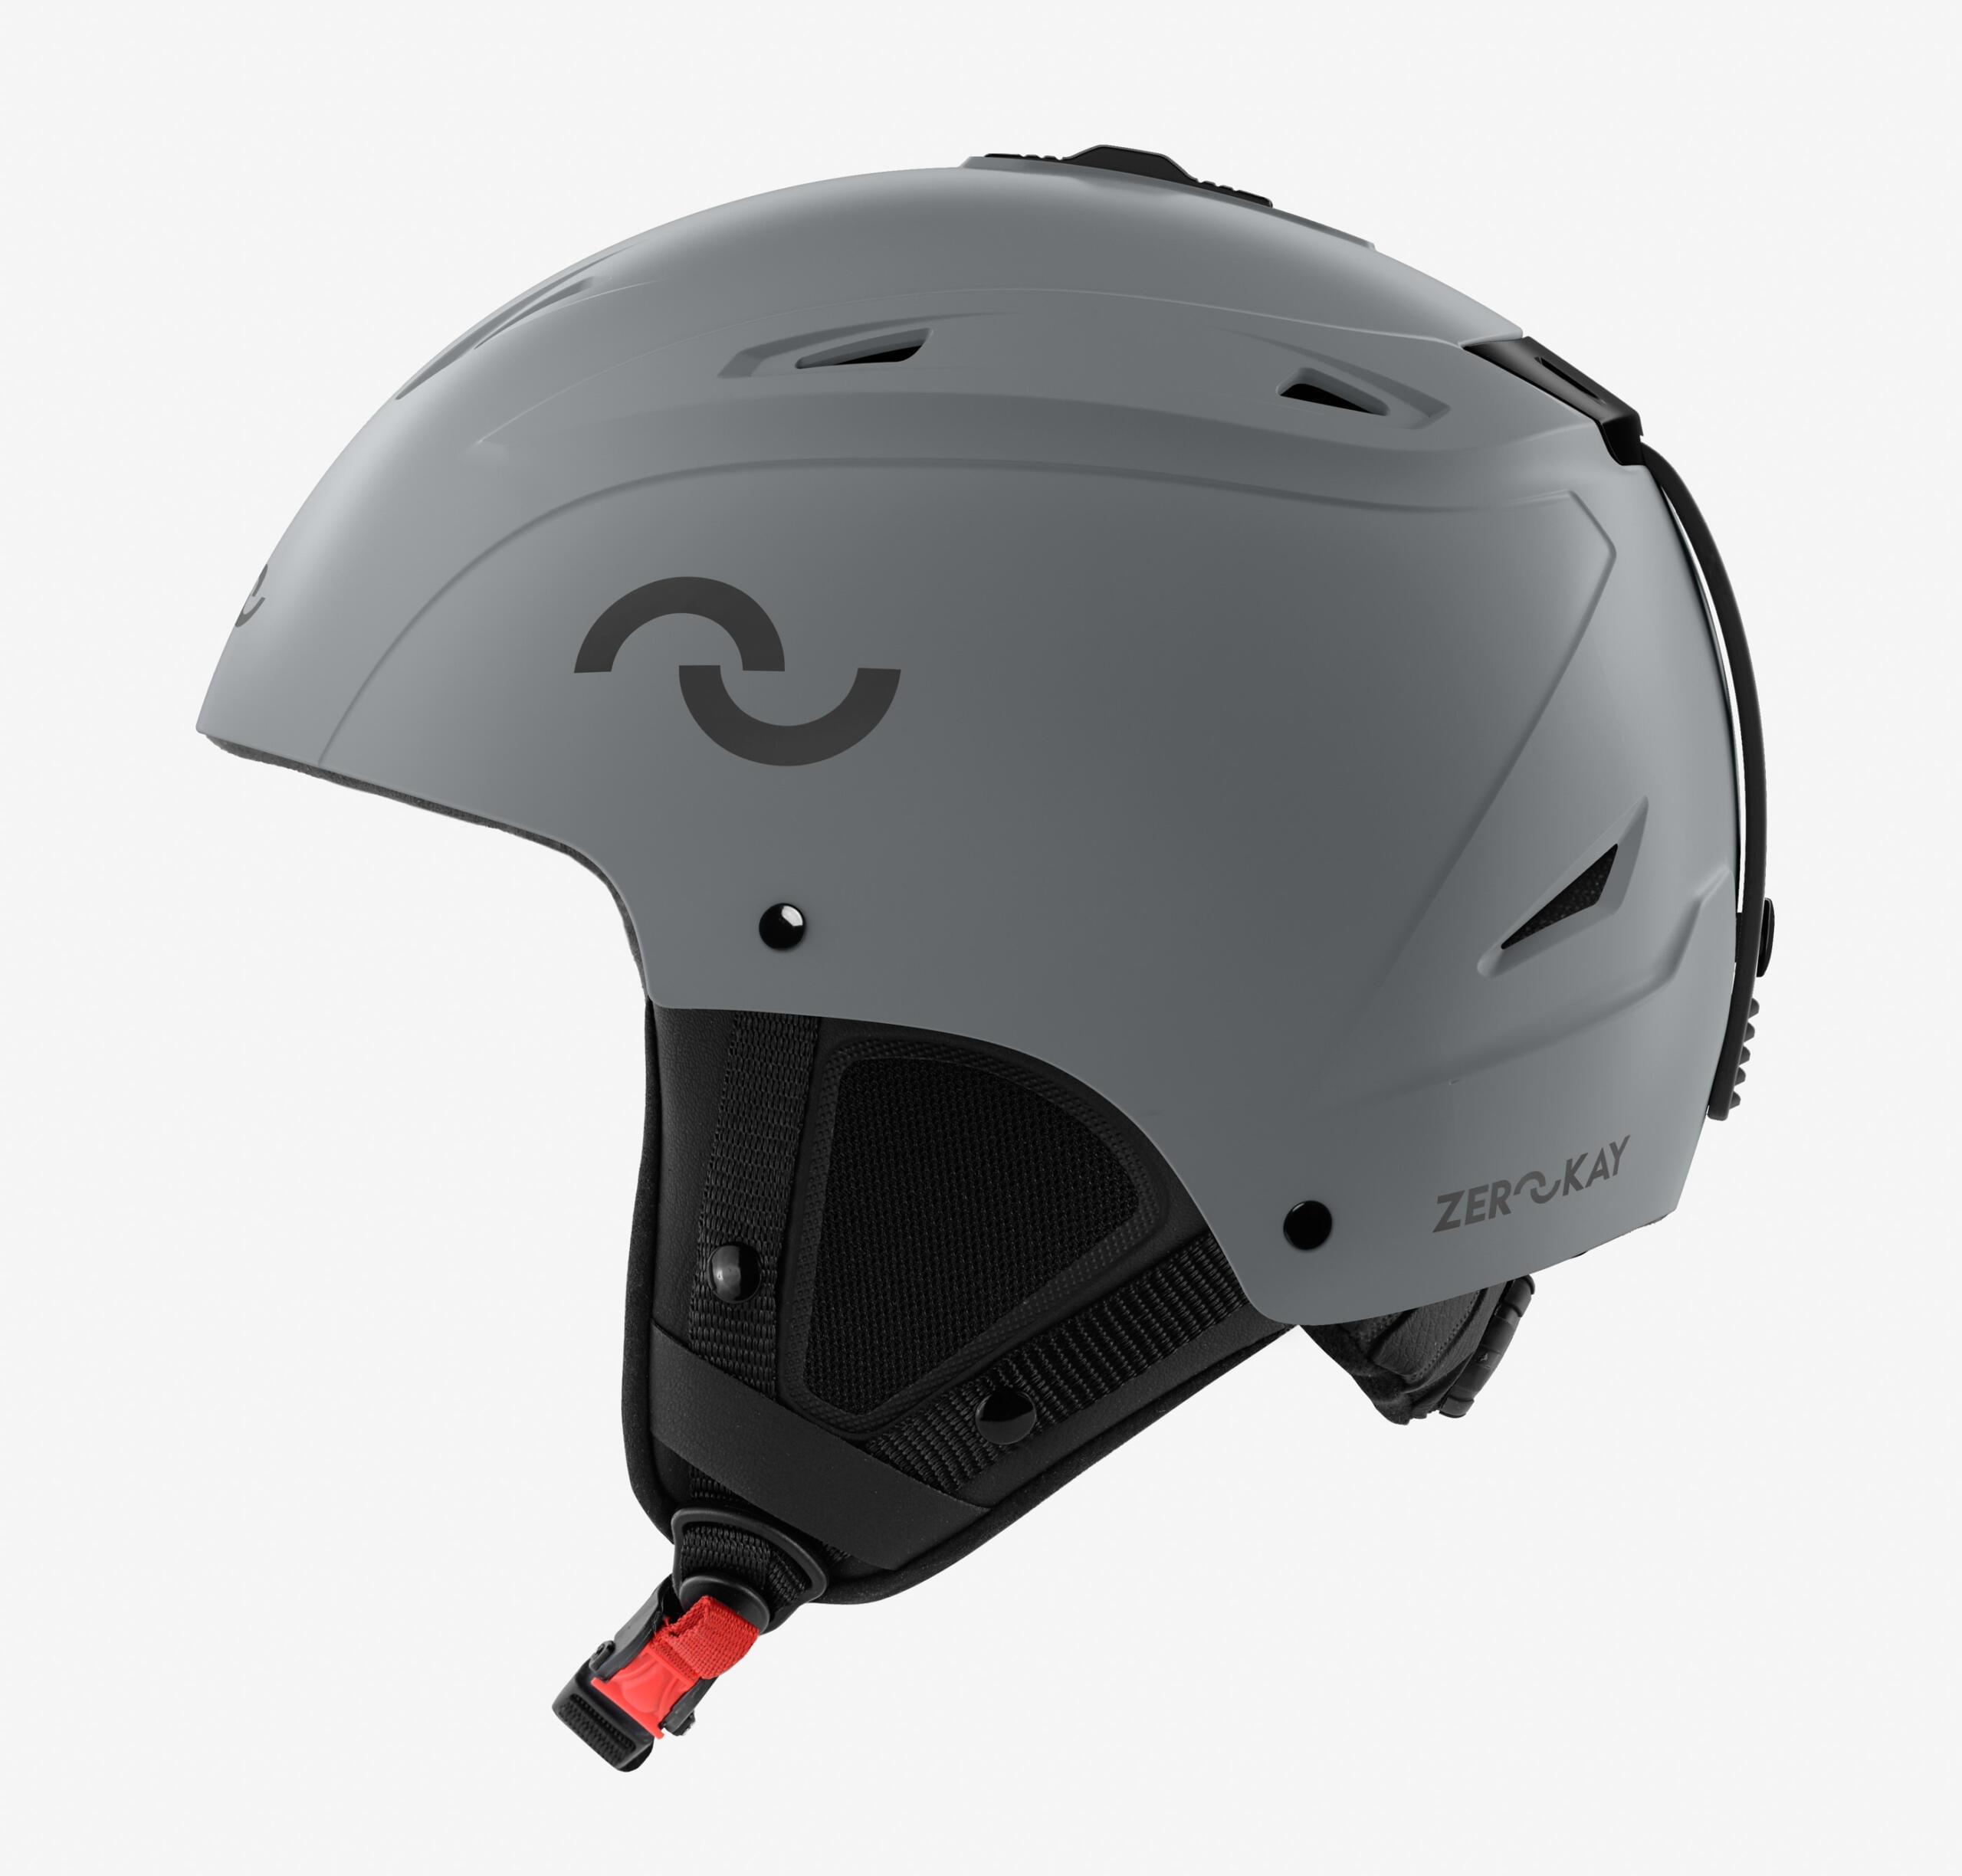 Legend TechMatt ski helmet for men in grey with a matte finish, showcasing sophisticated elegance, adaptive foam, and an adjustable fit for unparalleled comfort and style.